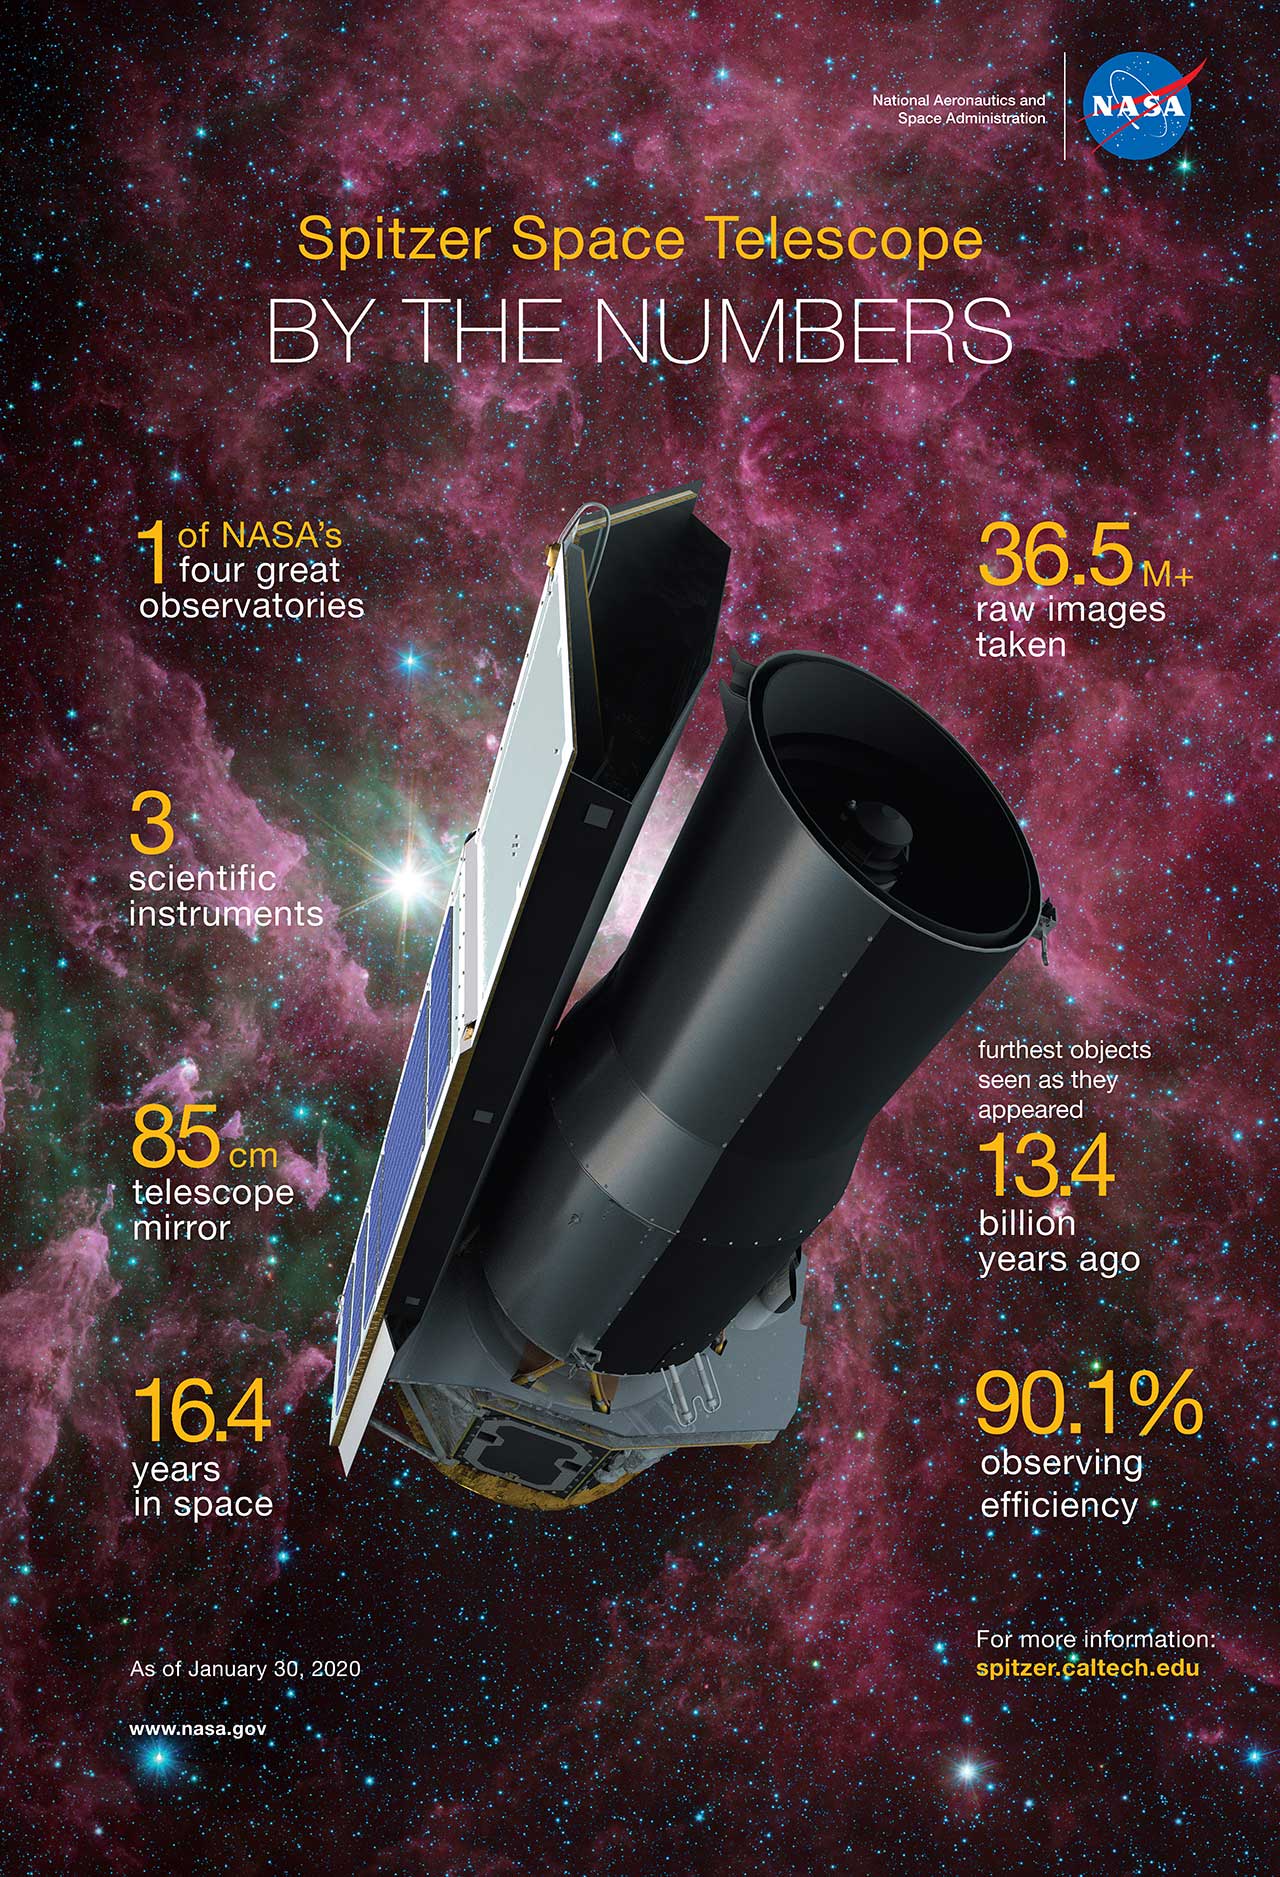 Spitzer by the numbers: 1 of NASA's 4 great observatories, 3 scientific instruments, 85 cm telescope mirror, 16.4 years in space, 36.5 million raw images, furthest objects seen as they appeared 13.4 billion years ago, 90.1% observing efficiency.